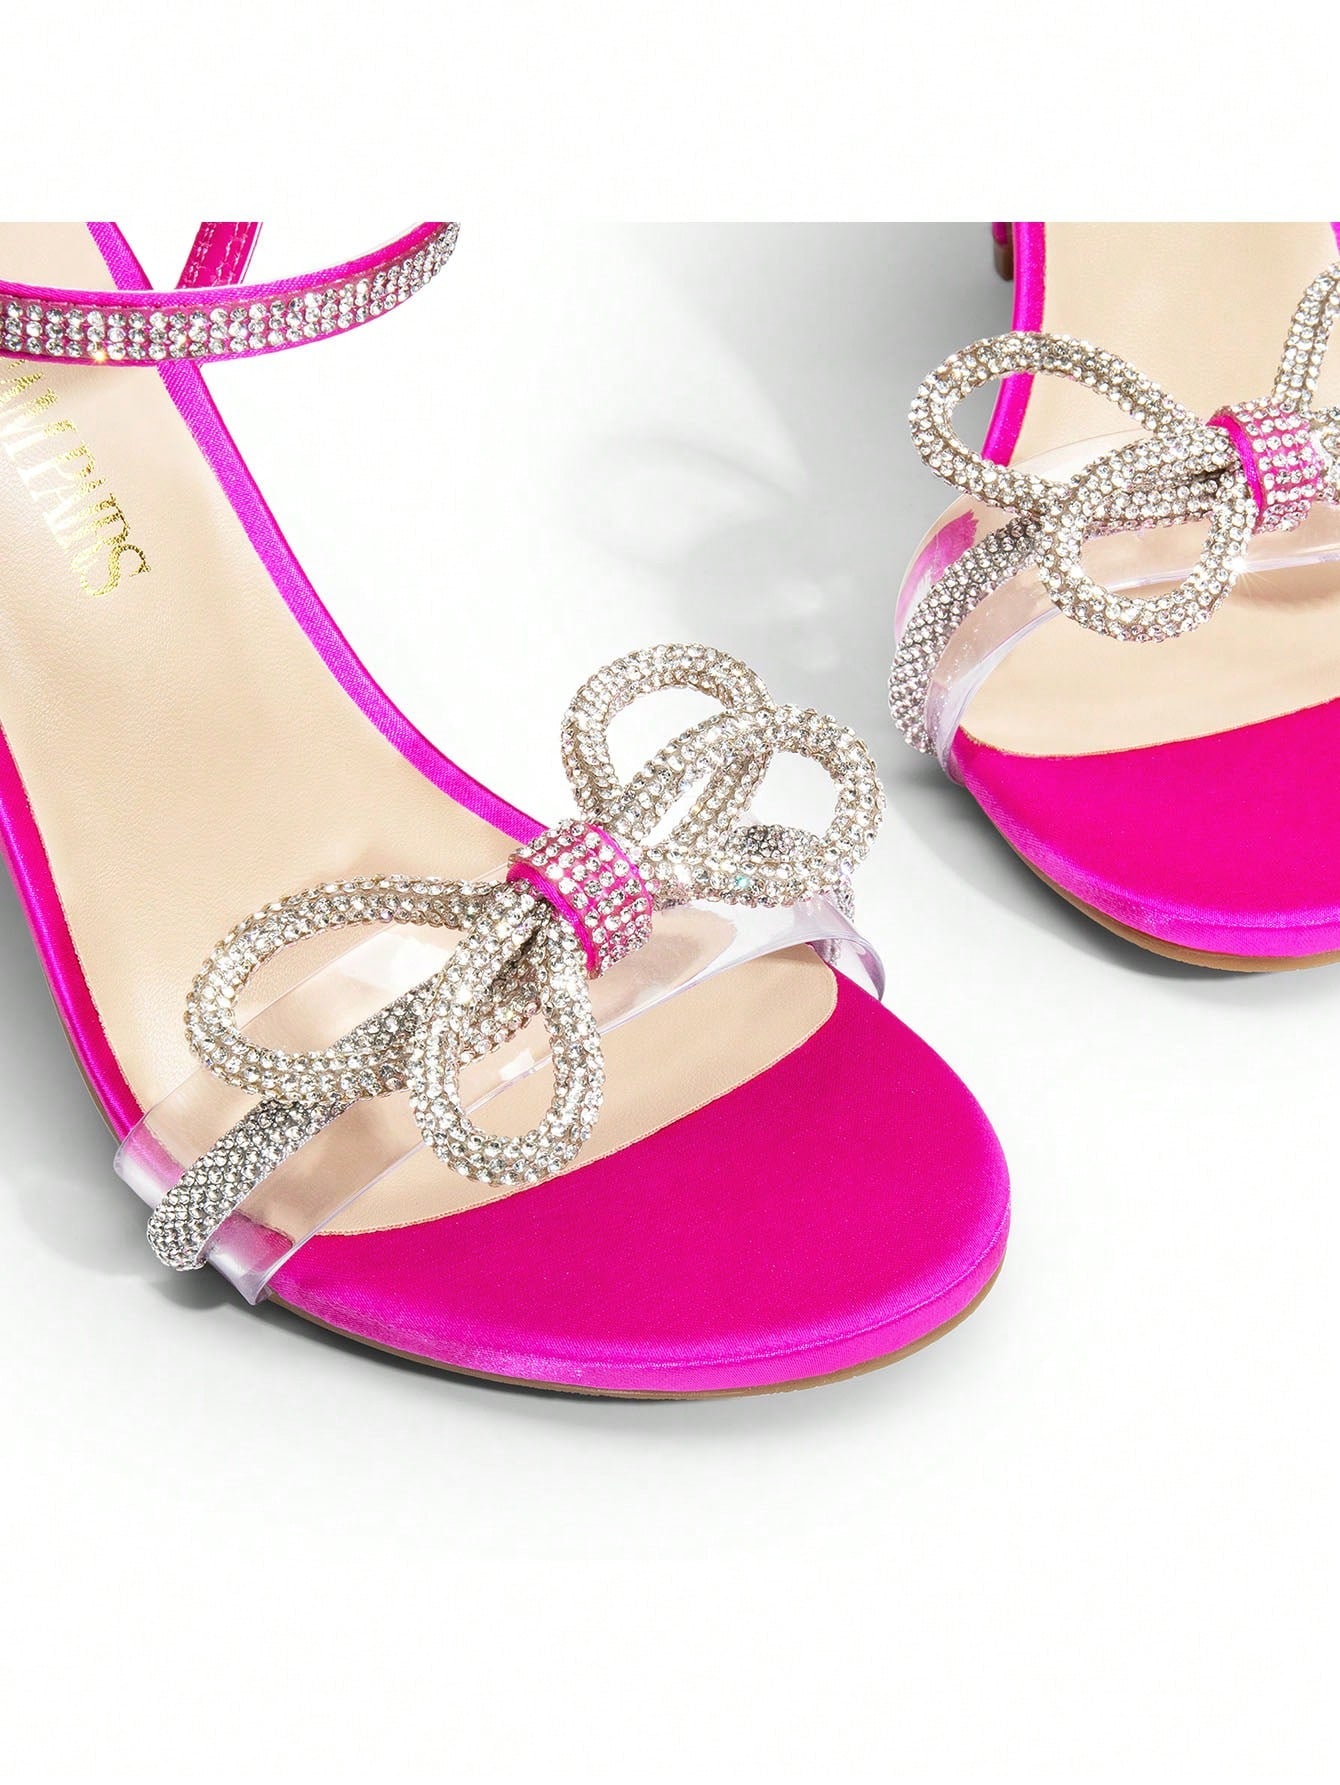 Women Double Bowknots Crystal Heeled Sandals, Open Toe Sparkly Stilettos Summer Sandals For Party Wedding Prom-Hot Pink-6